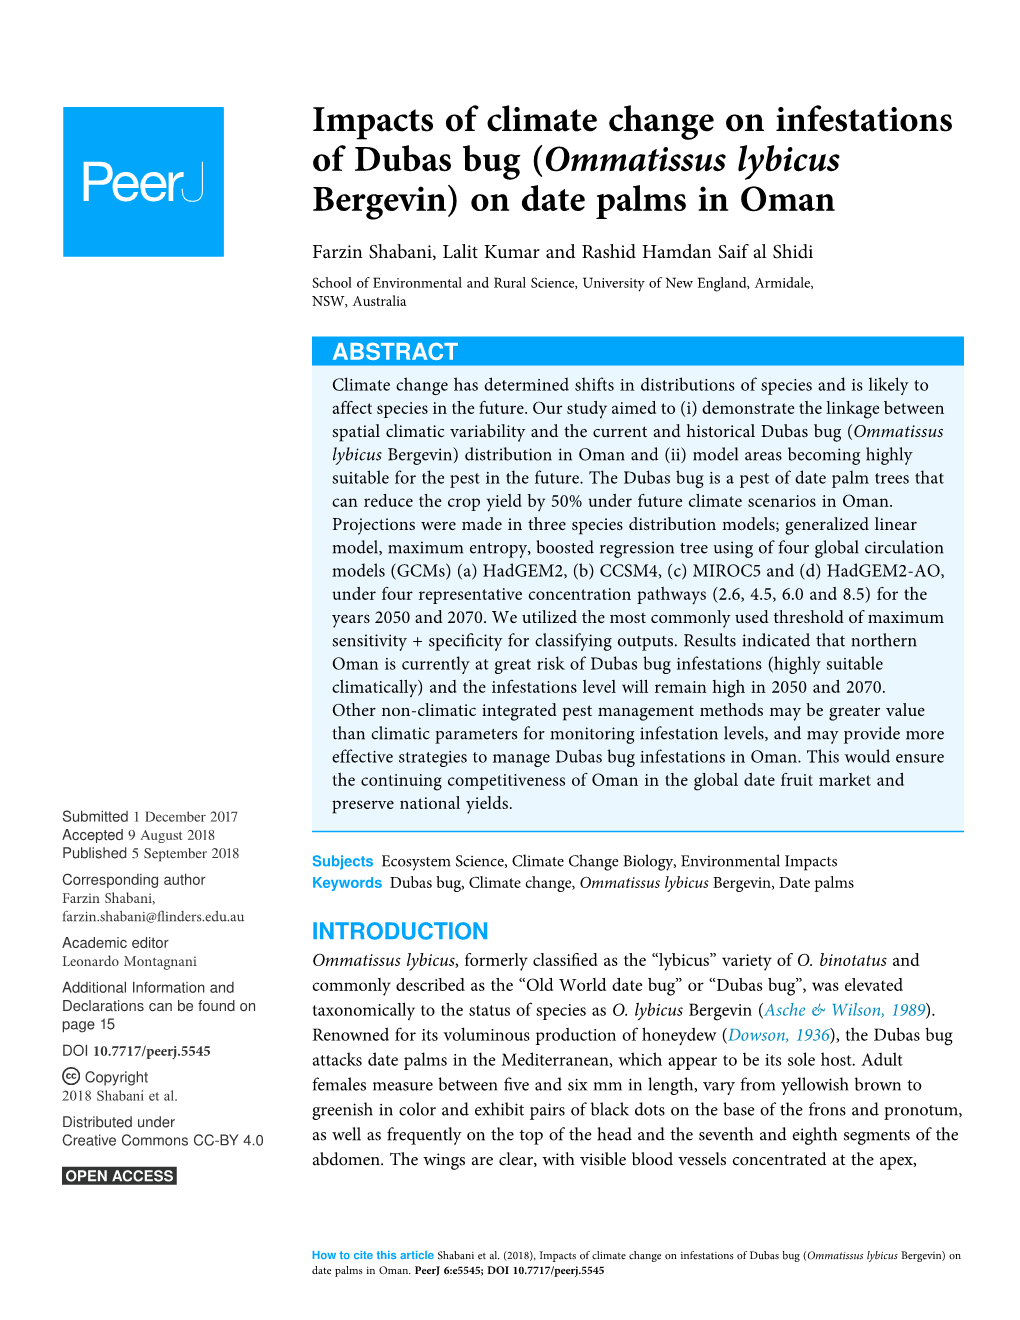 Impacts of Climate Change on Infestations of Dubas Bug (Ommatissus Lybicus Bergevin) on Date Palms in Oman